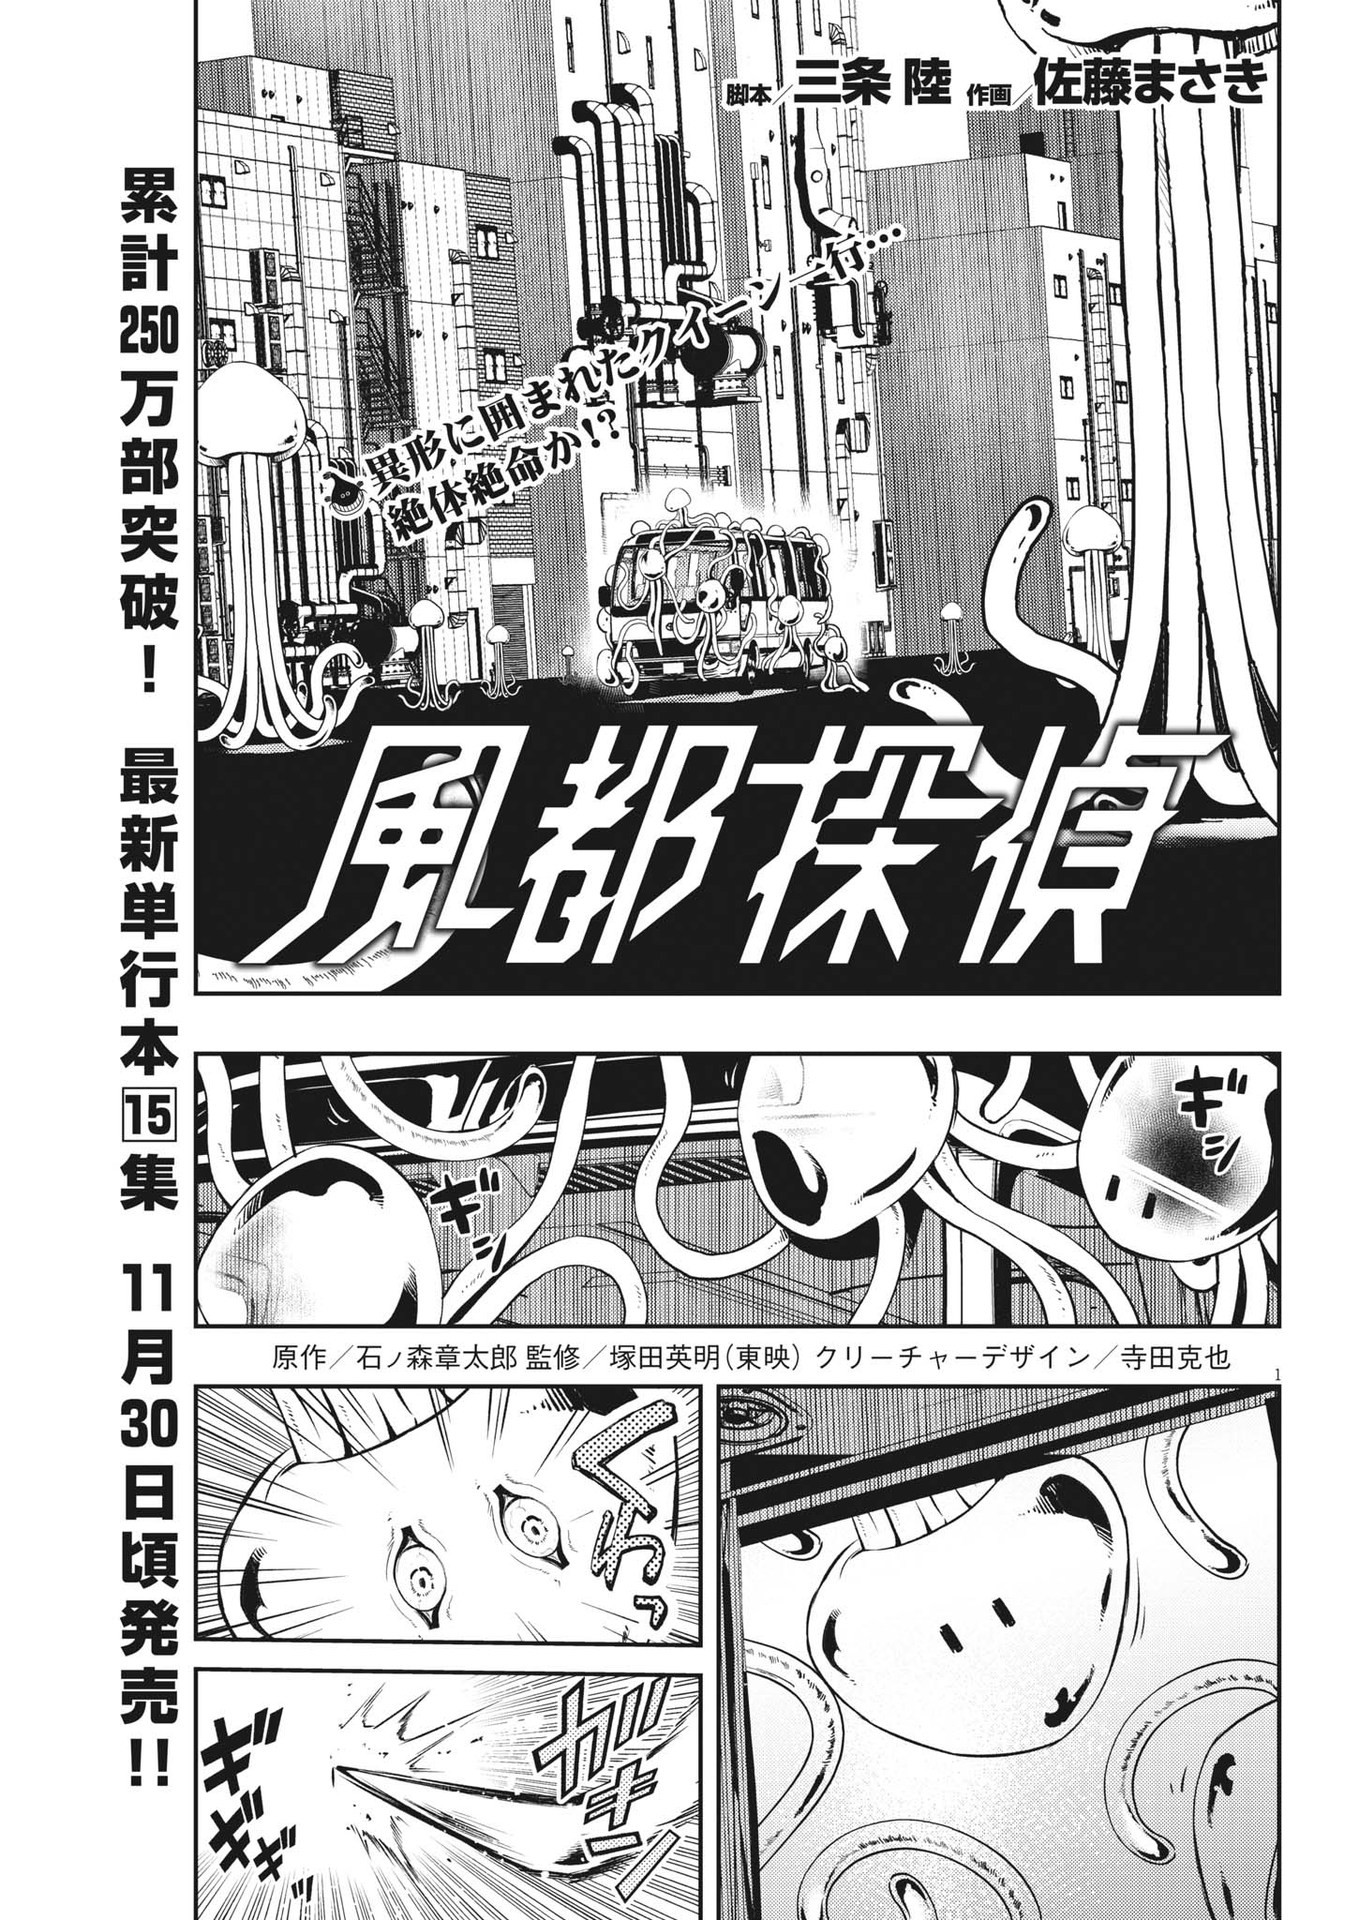 Kamen Rider W: Fuuto Tantei - Chapter 138 - Page 1